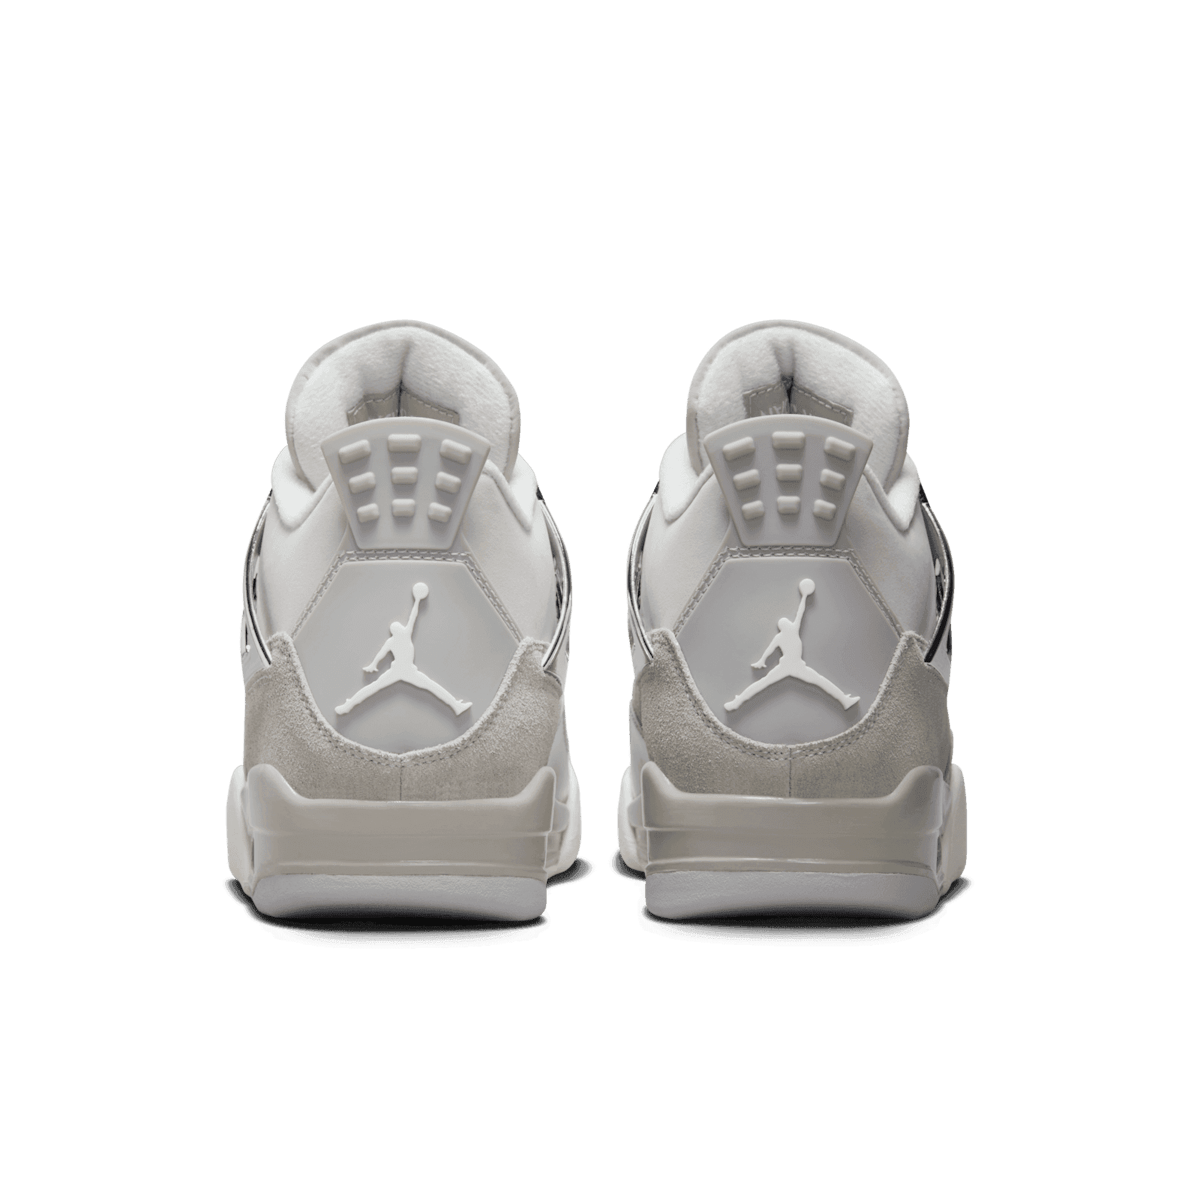 The Nike Air Jordan 4 'Frozen Moments' is as pure as it gets